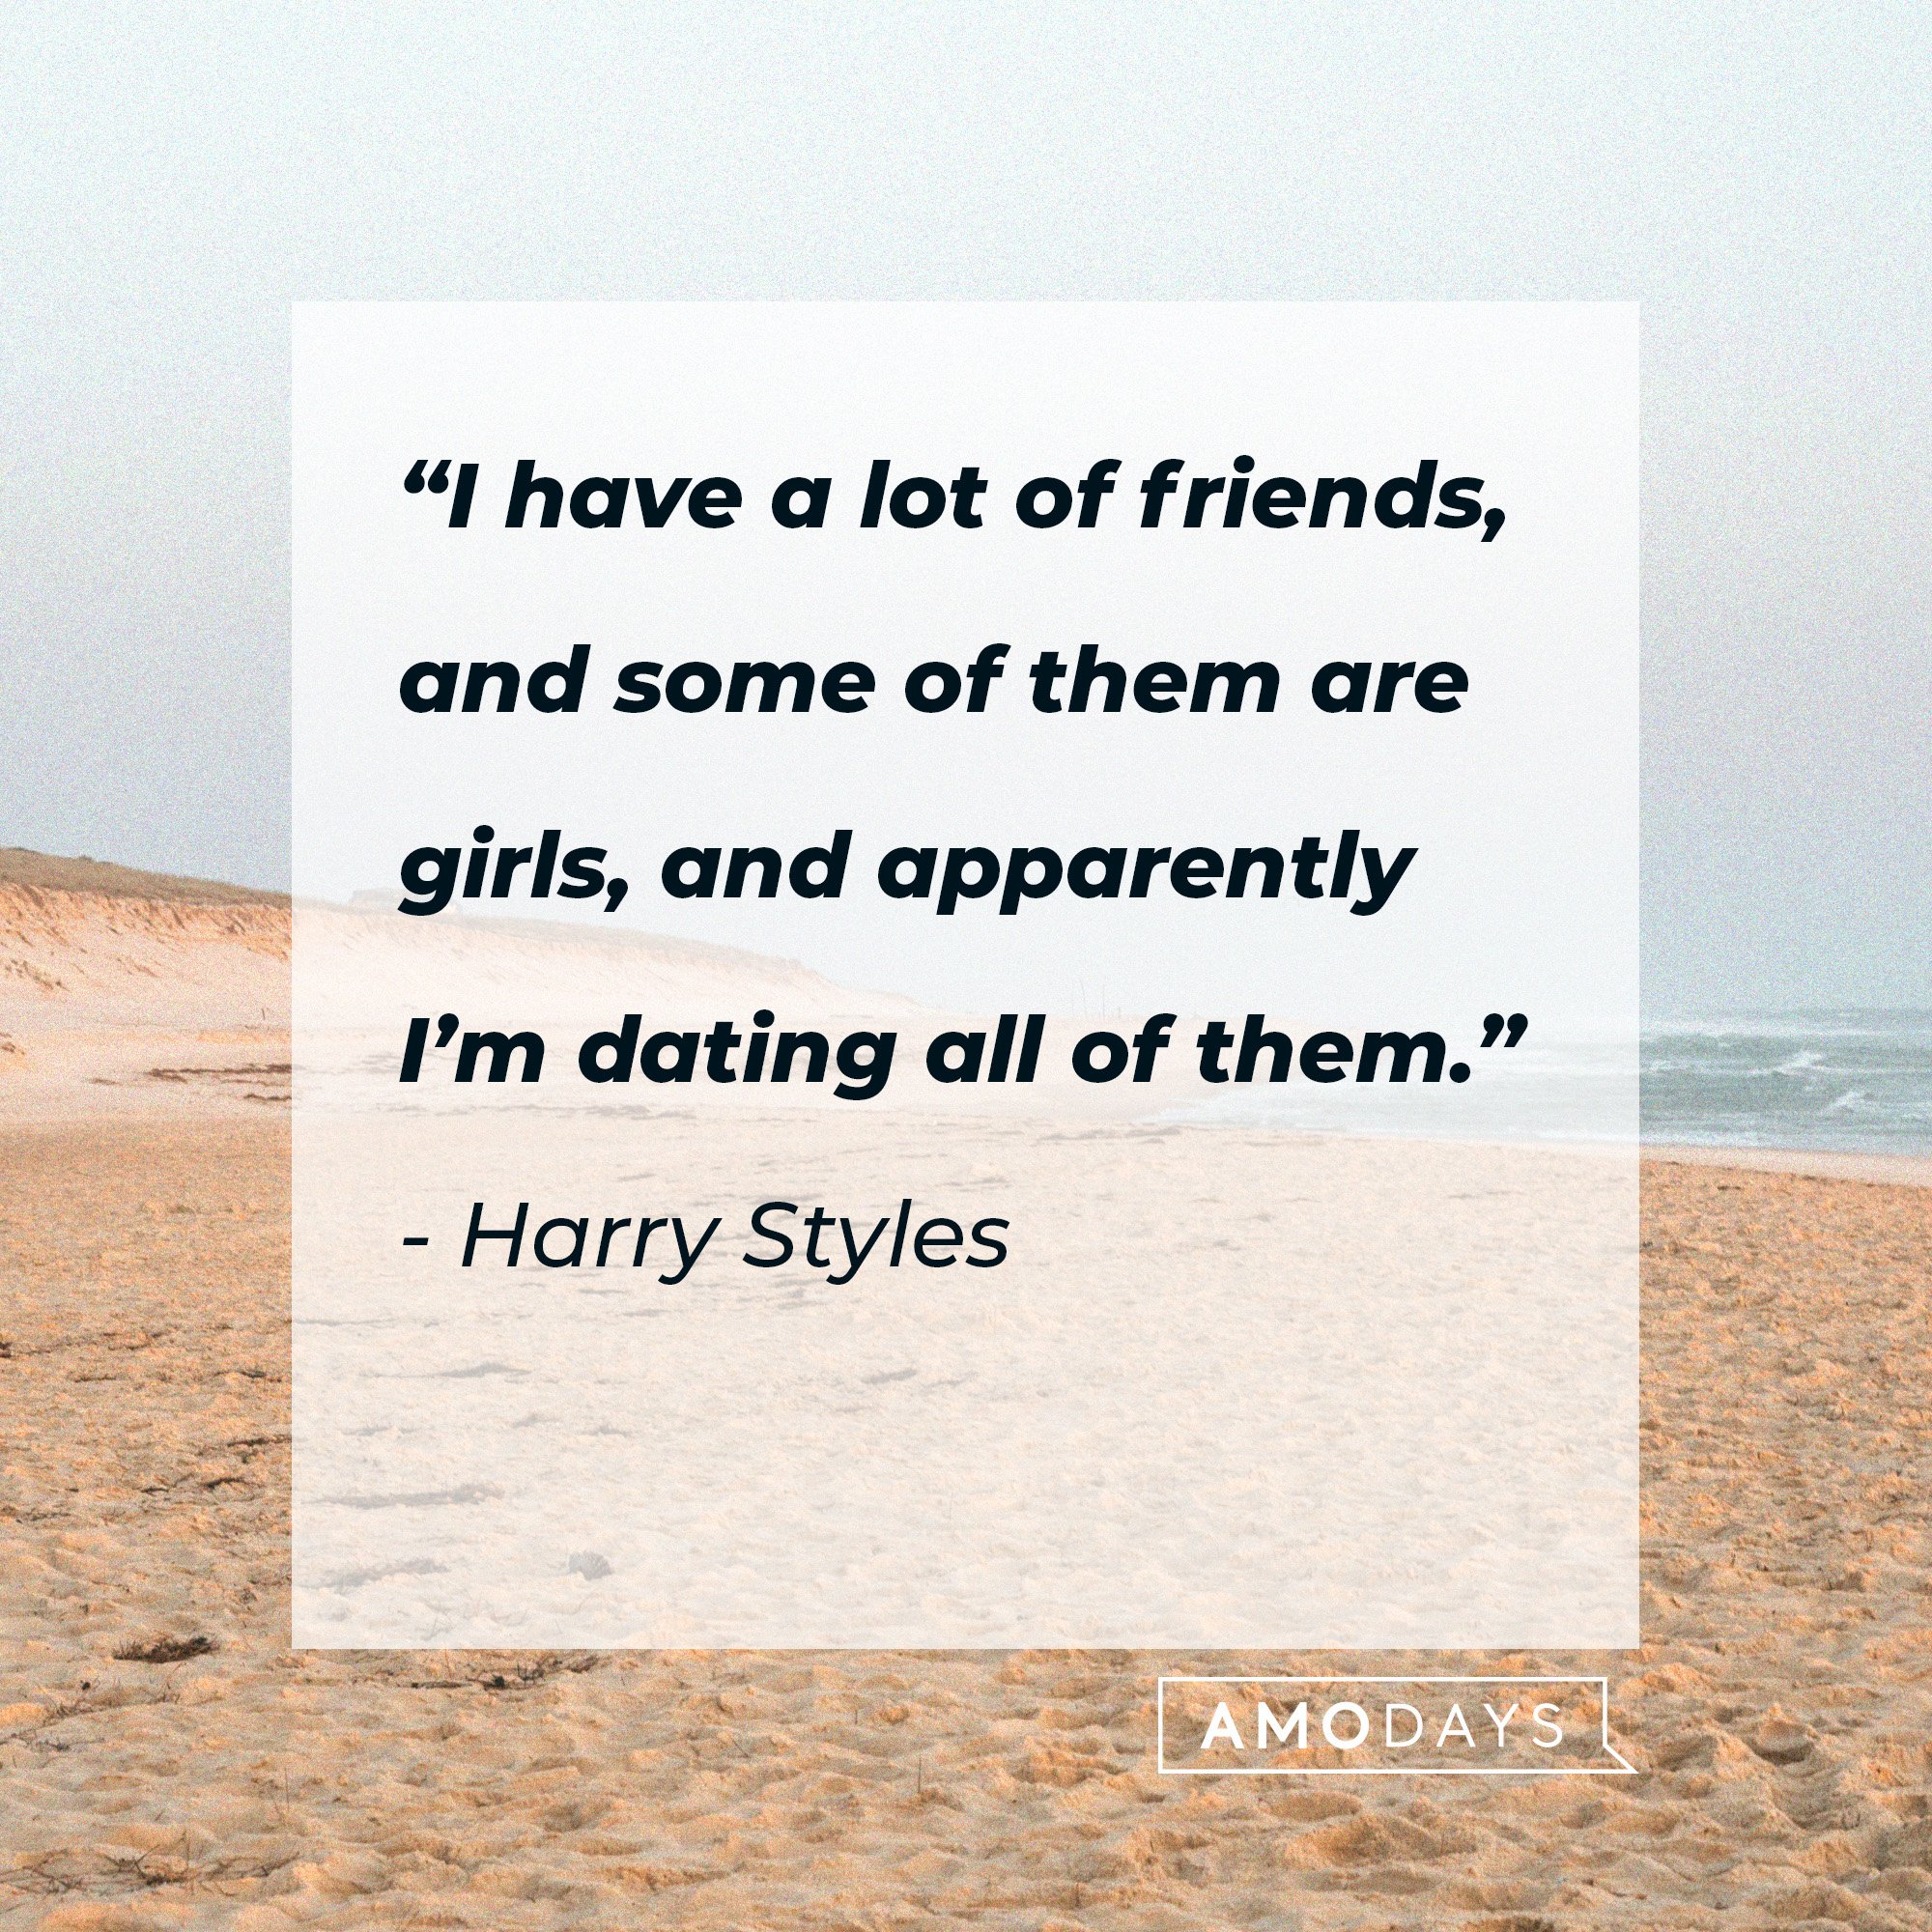 Harry Styles’ quote: "I have a lot of friends, and some of them are girls, and apparently, I’m dating all of them.” |  Source: AmoDays